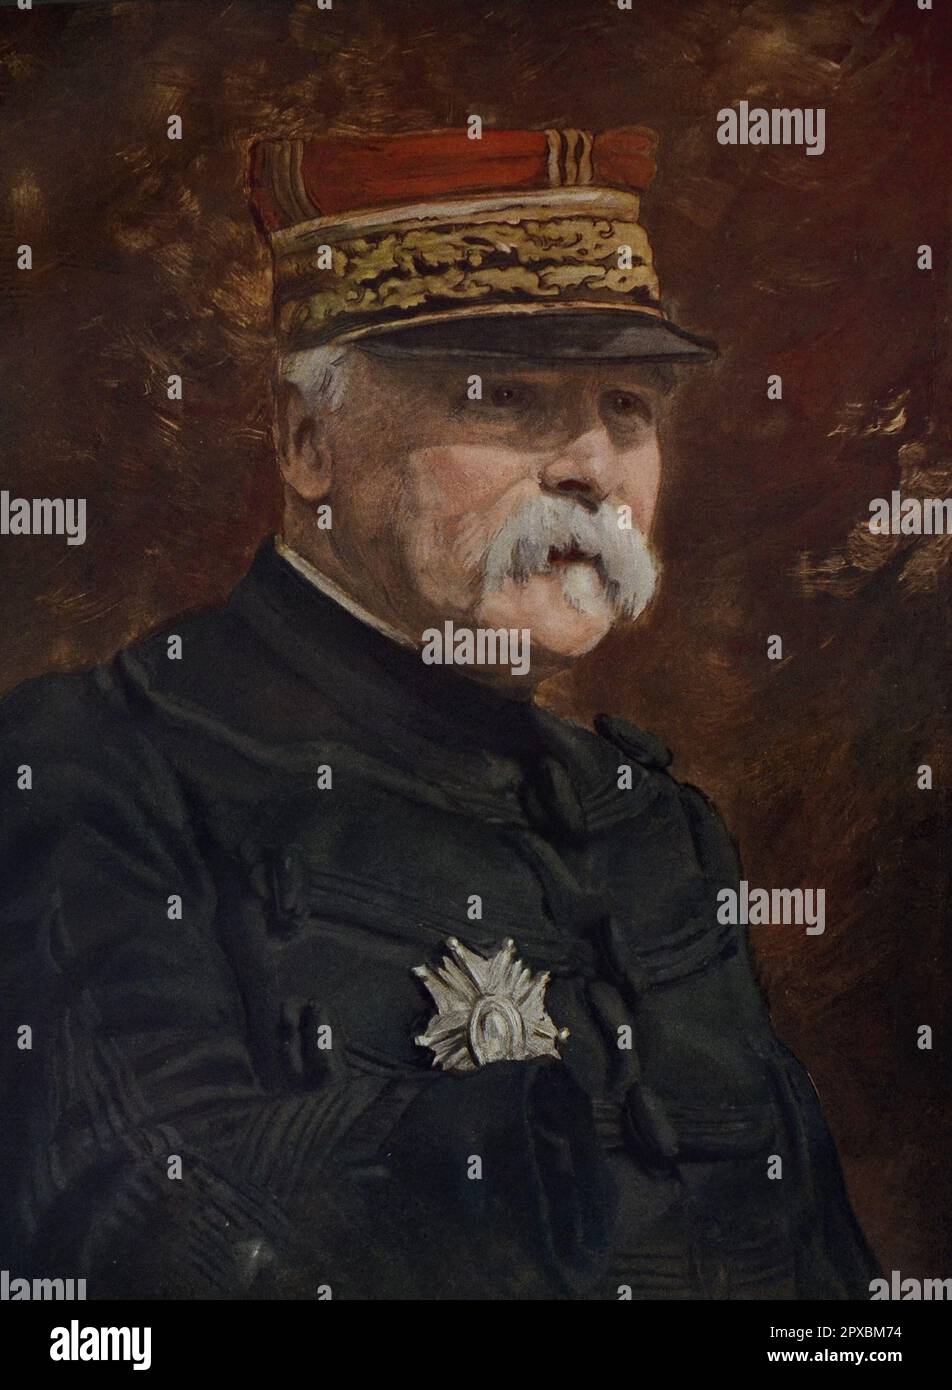 French general Pau.  Paul Marie Cesar Gerald Pau, (1848–1932) was a French soldier and general who served in the Franco-Prussian War and in World War I. Stock Photo